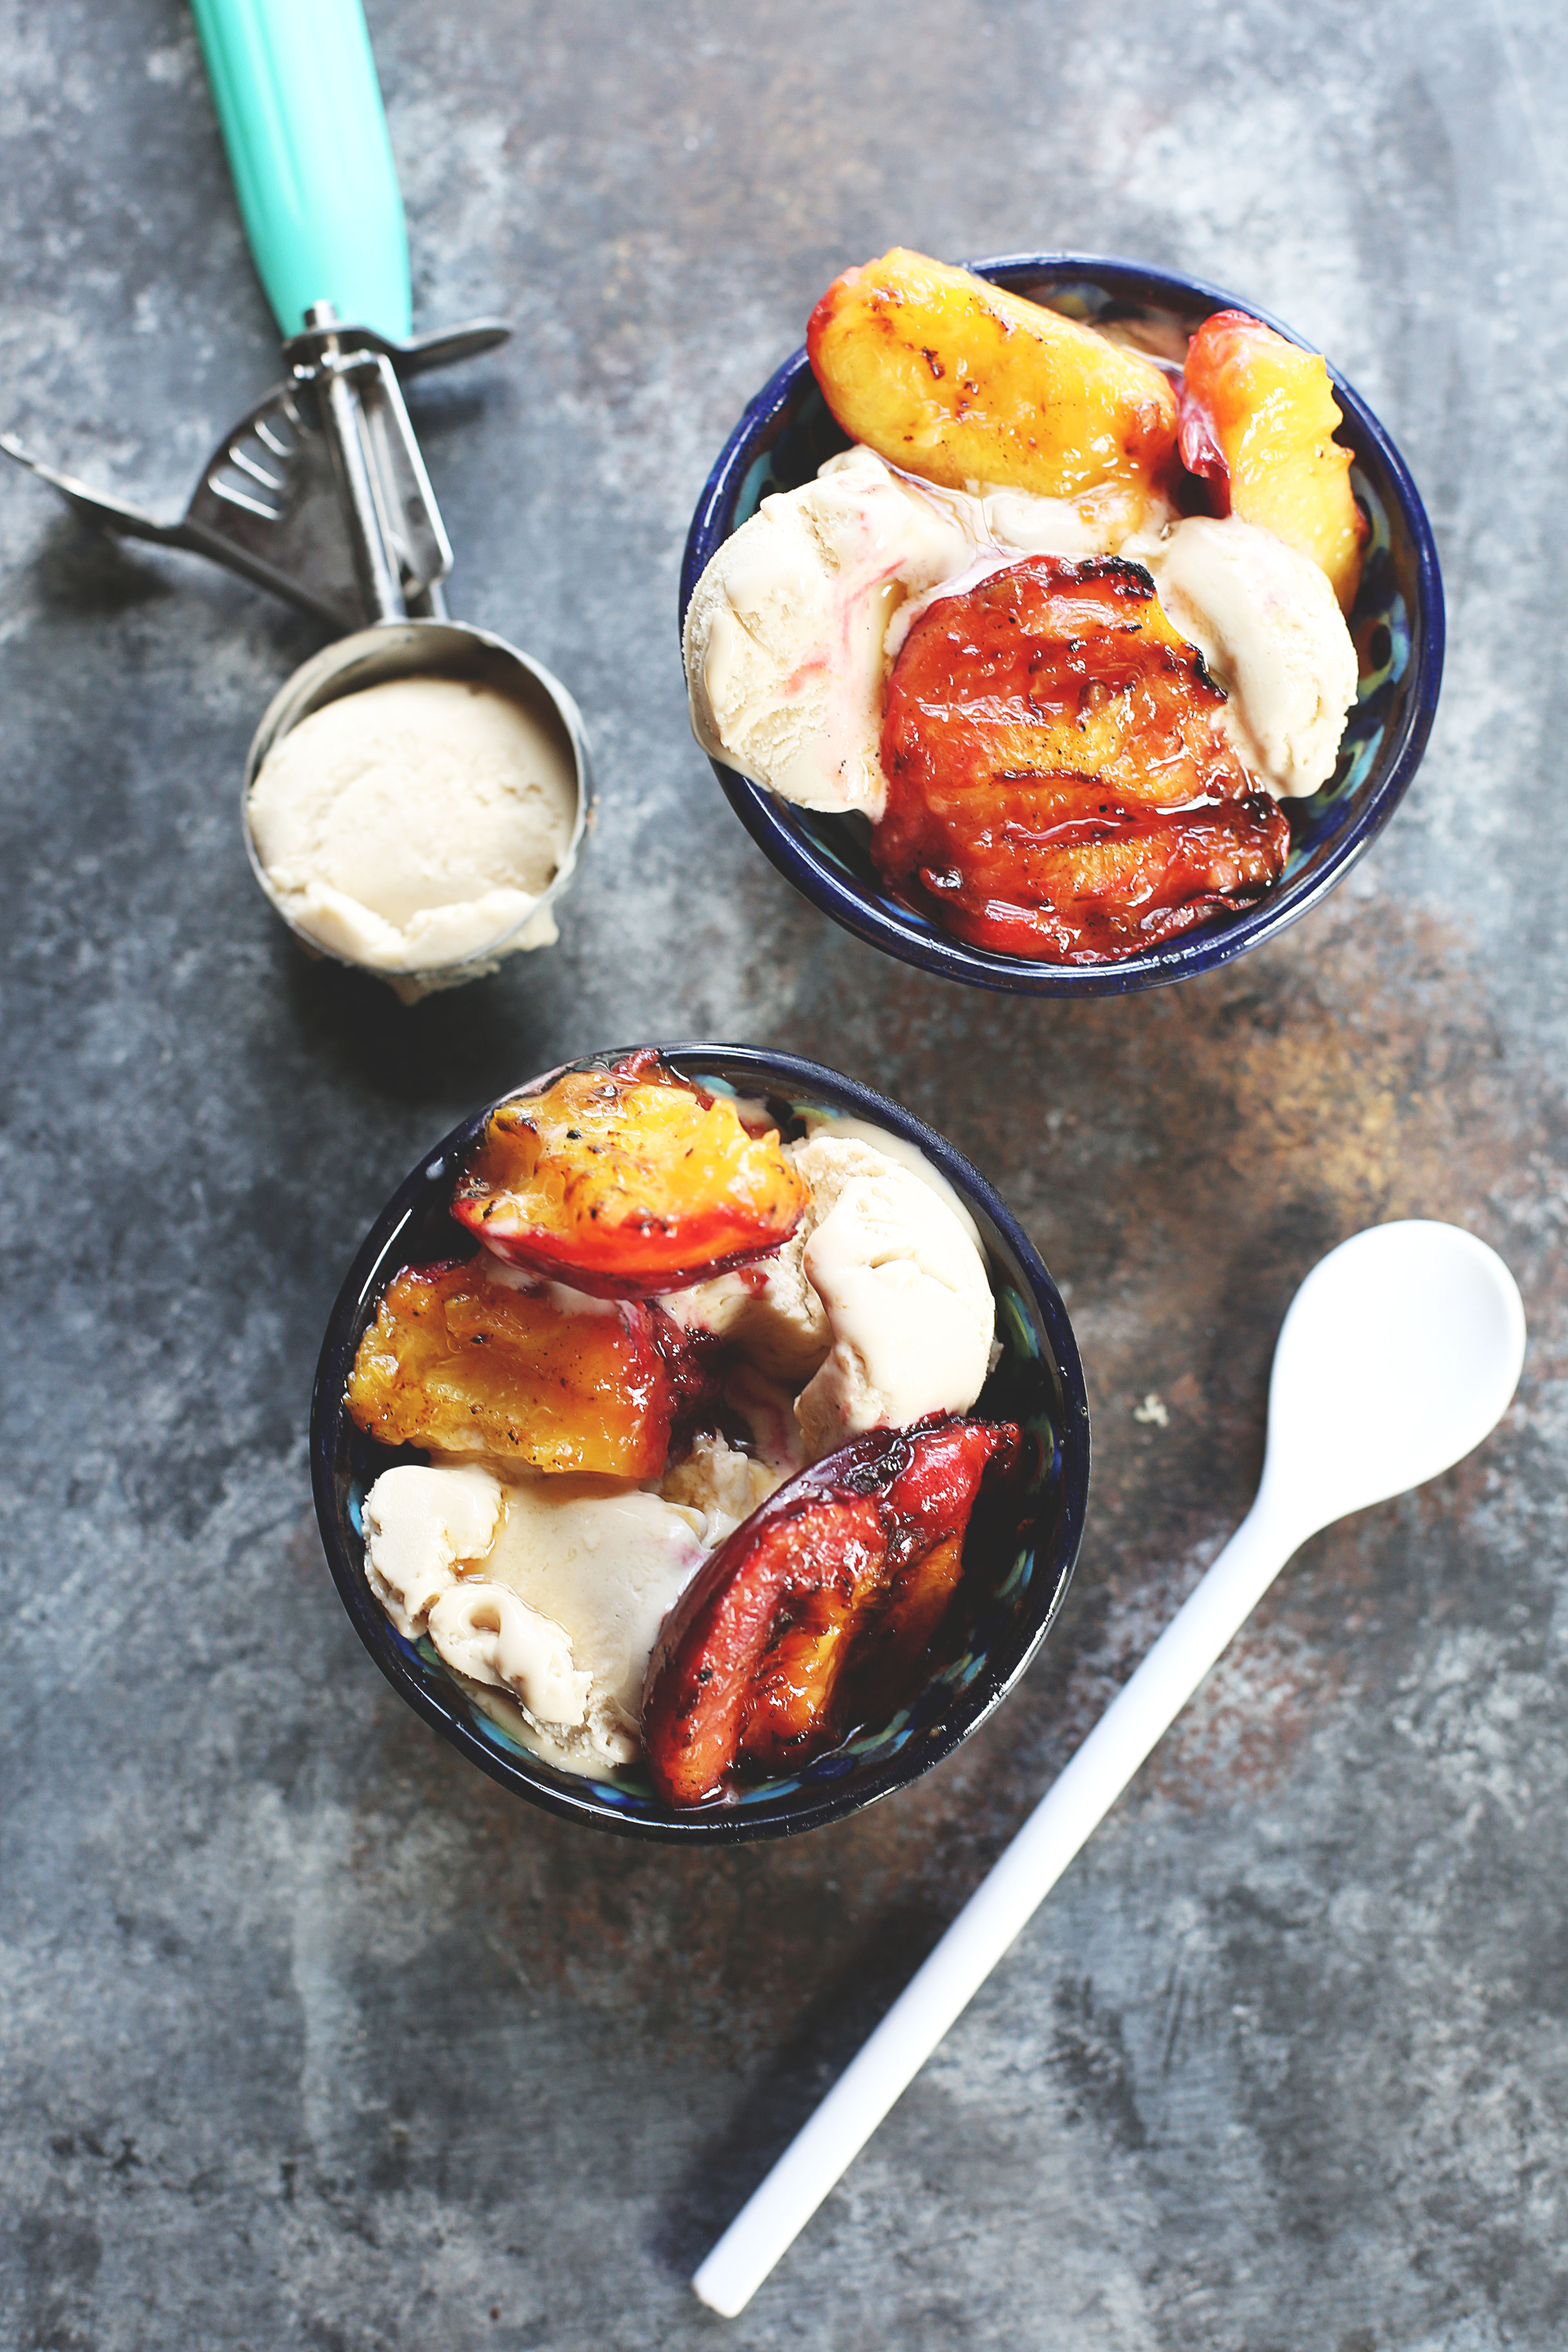 Each bite of these grilled peaches over vegan ice cream is like a little taste of summer. This simple vegan dessert is the perfect healthy treat to finish off an amazing BBQ.